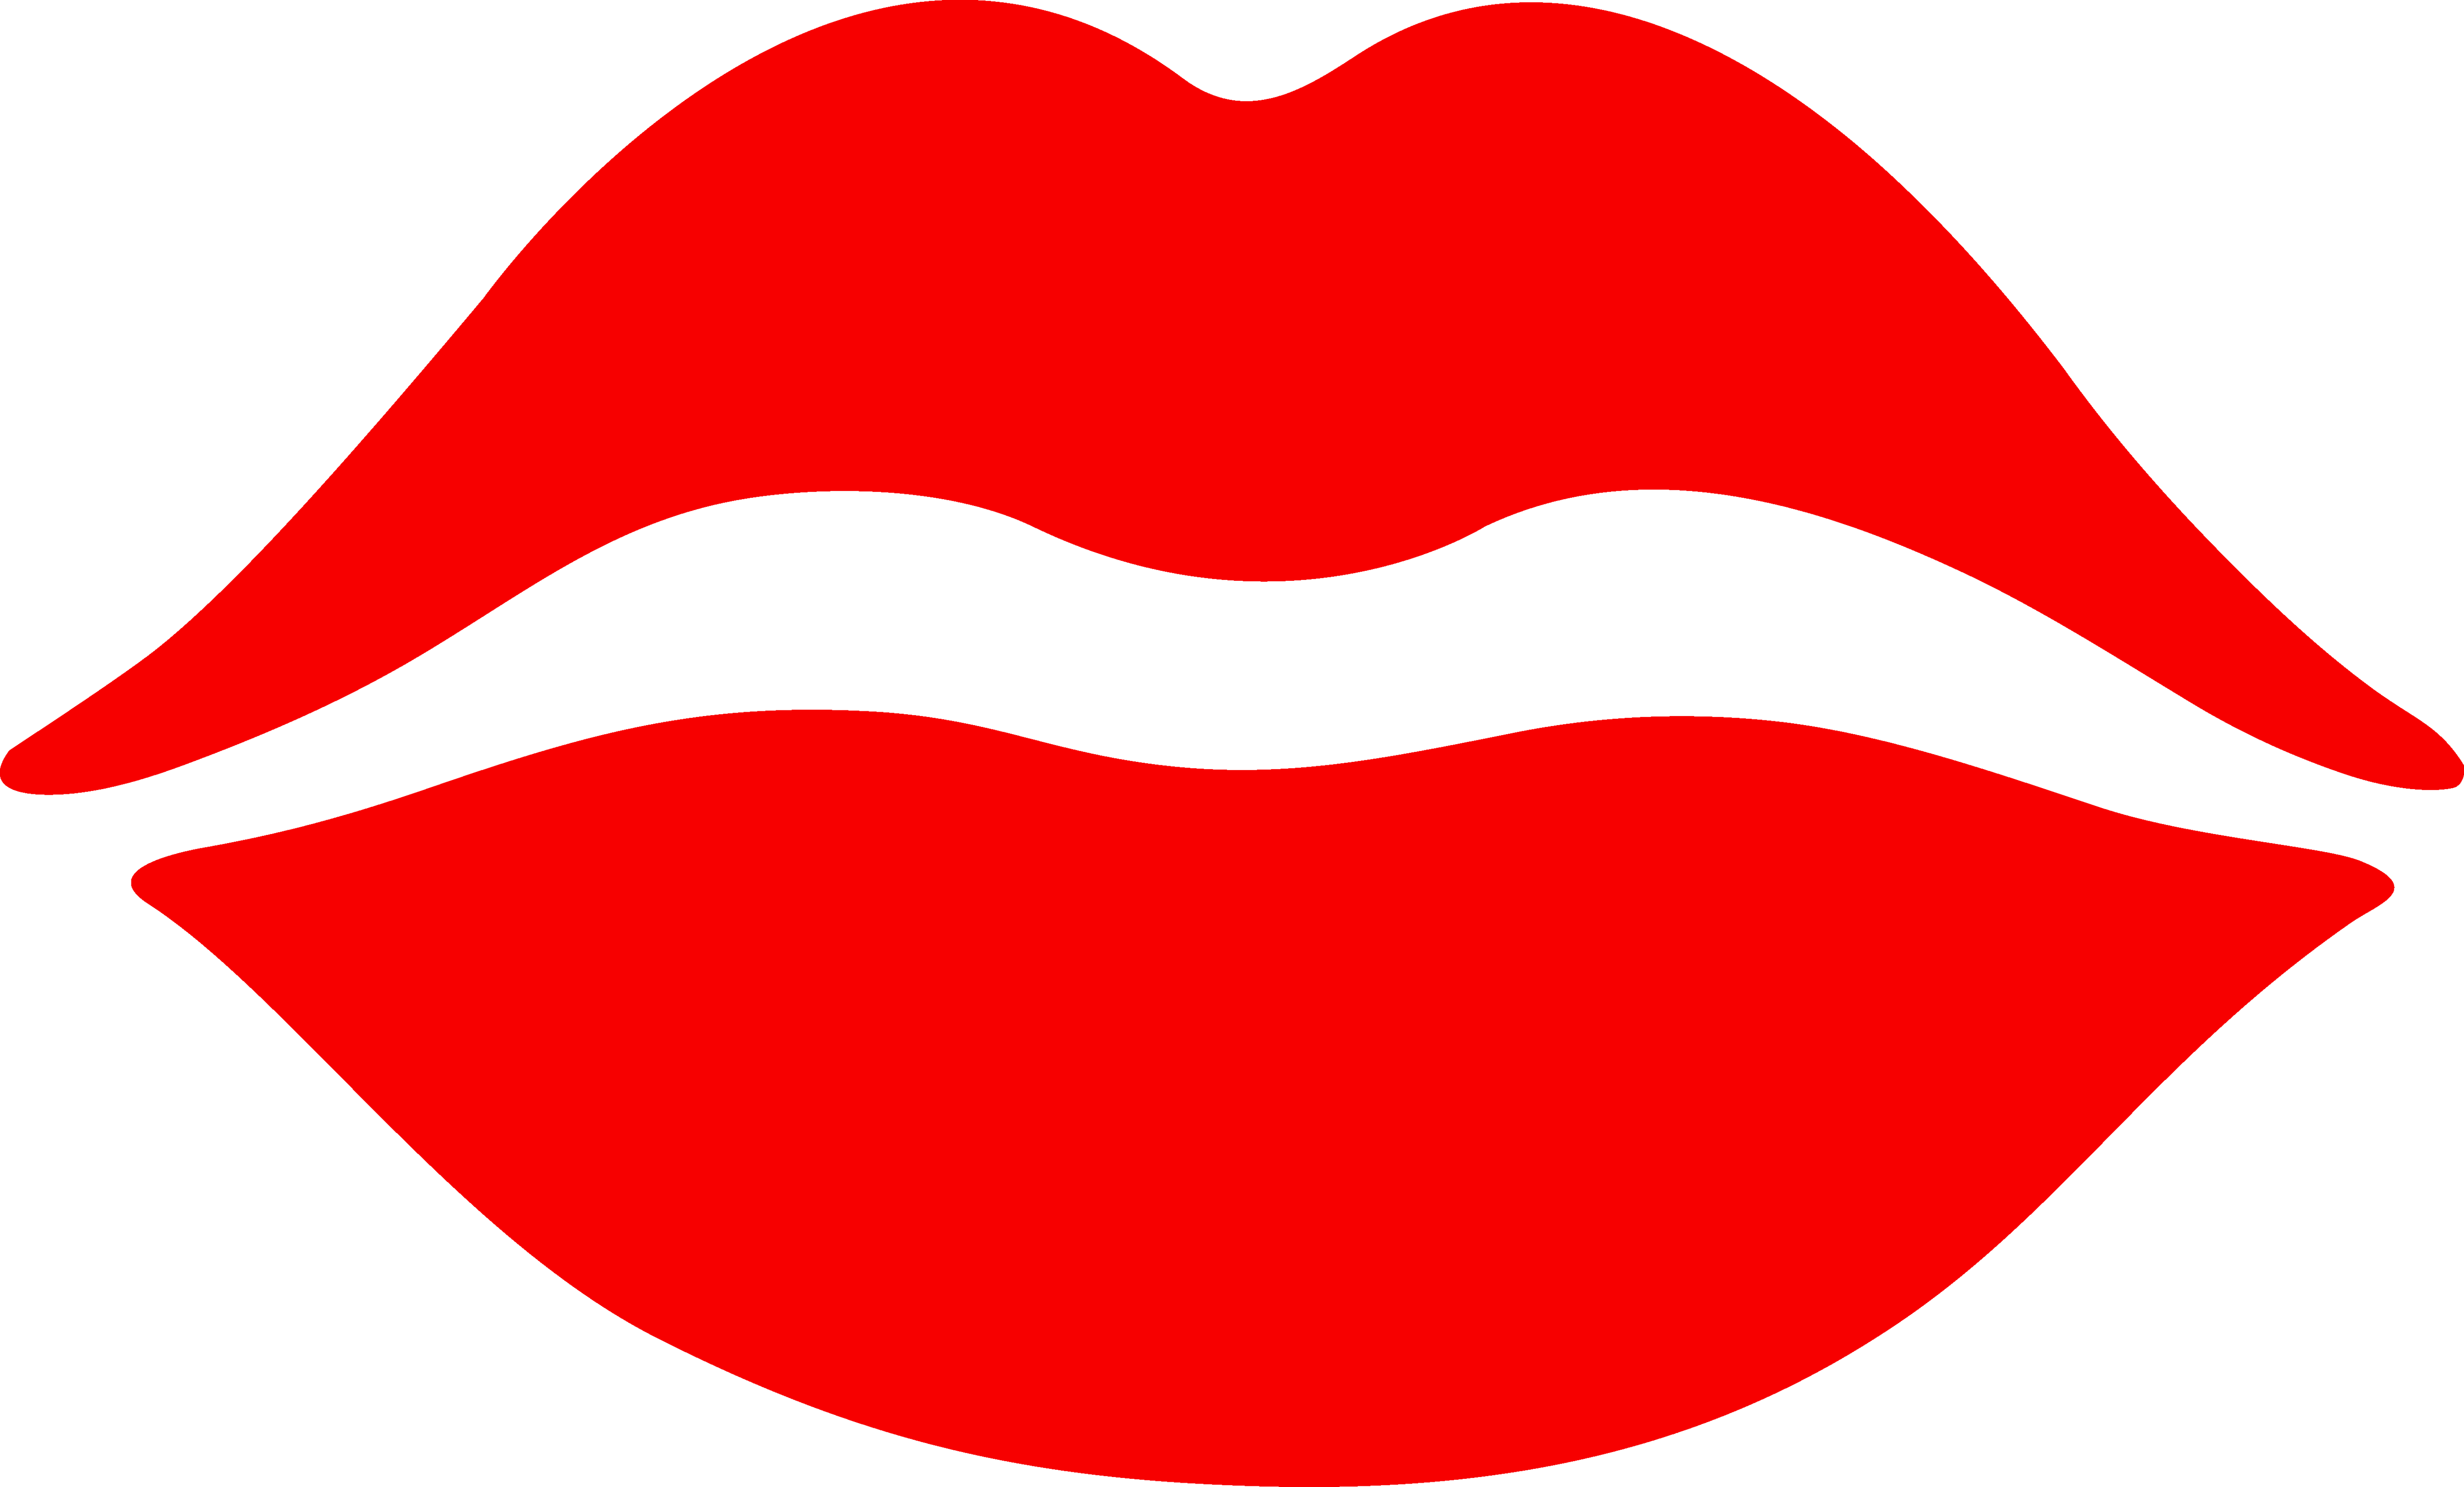 Red Lips Picture Cartoon Colour In Clipart - Free to use Clip Art ...